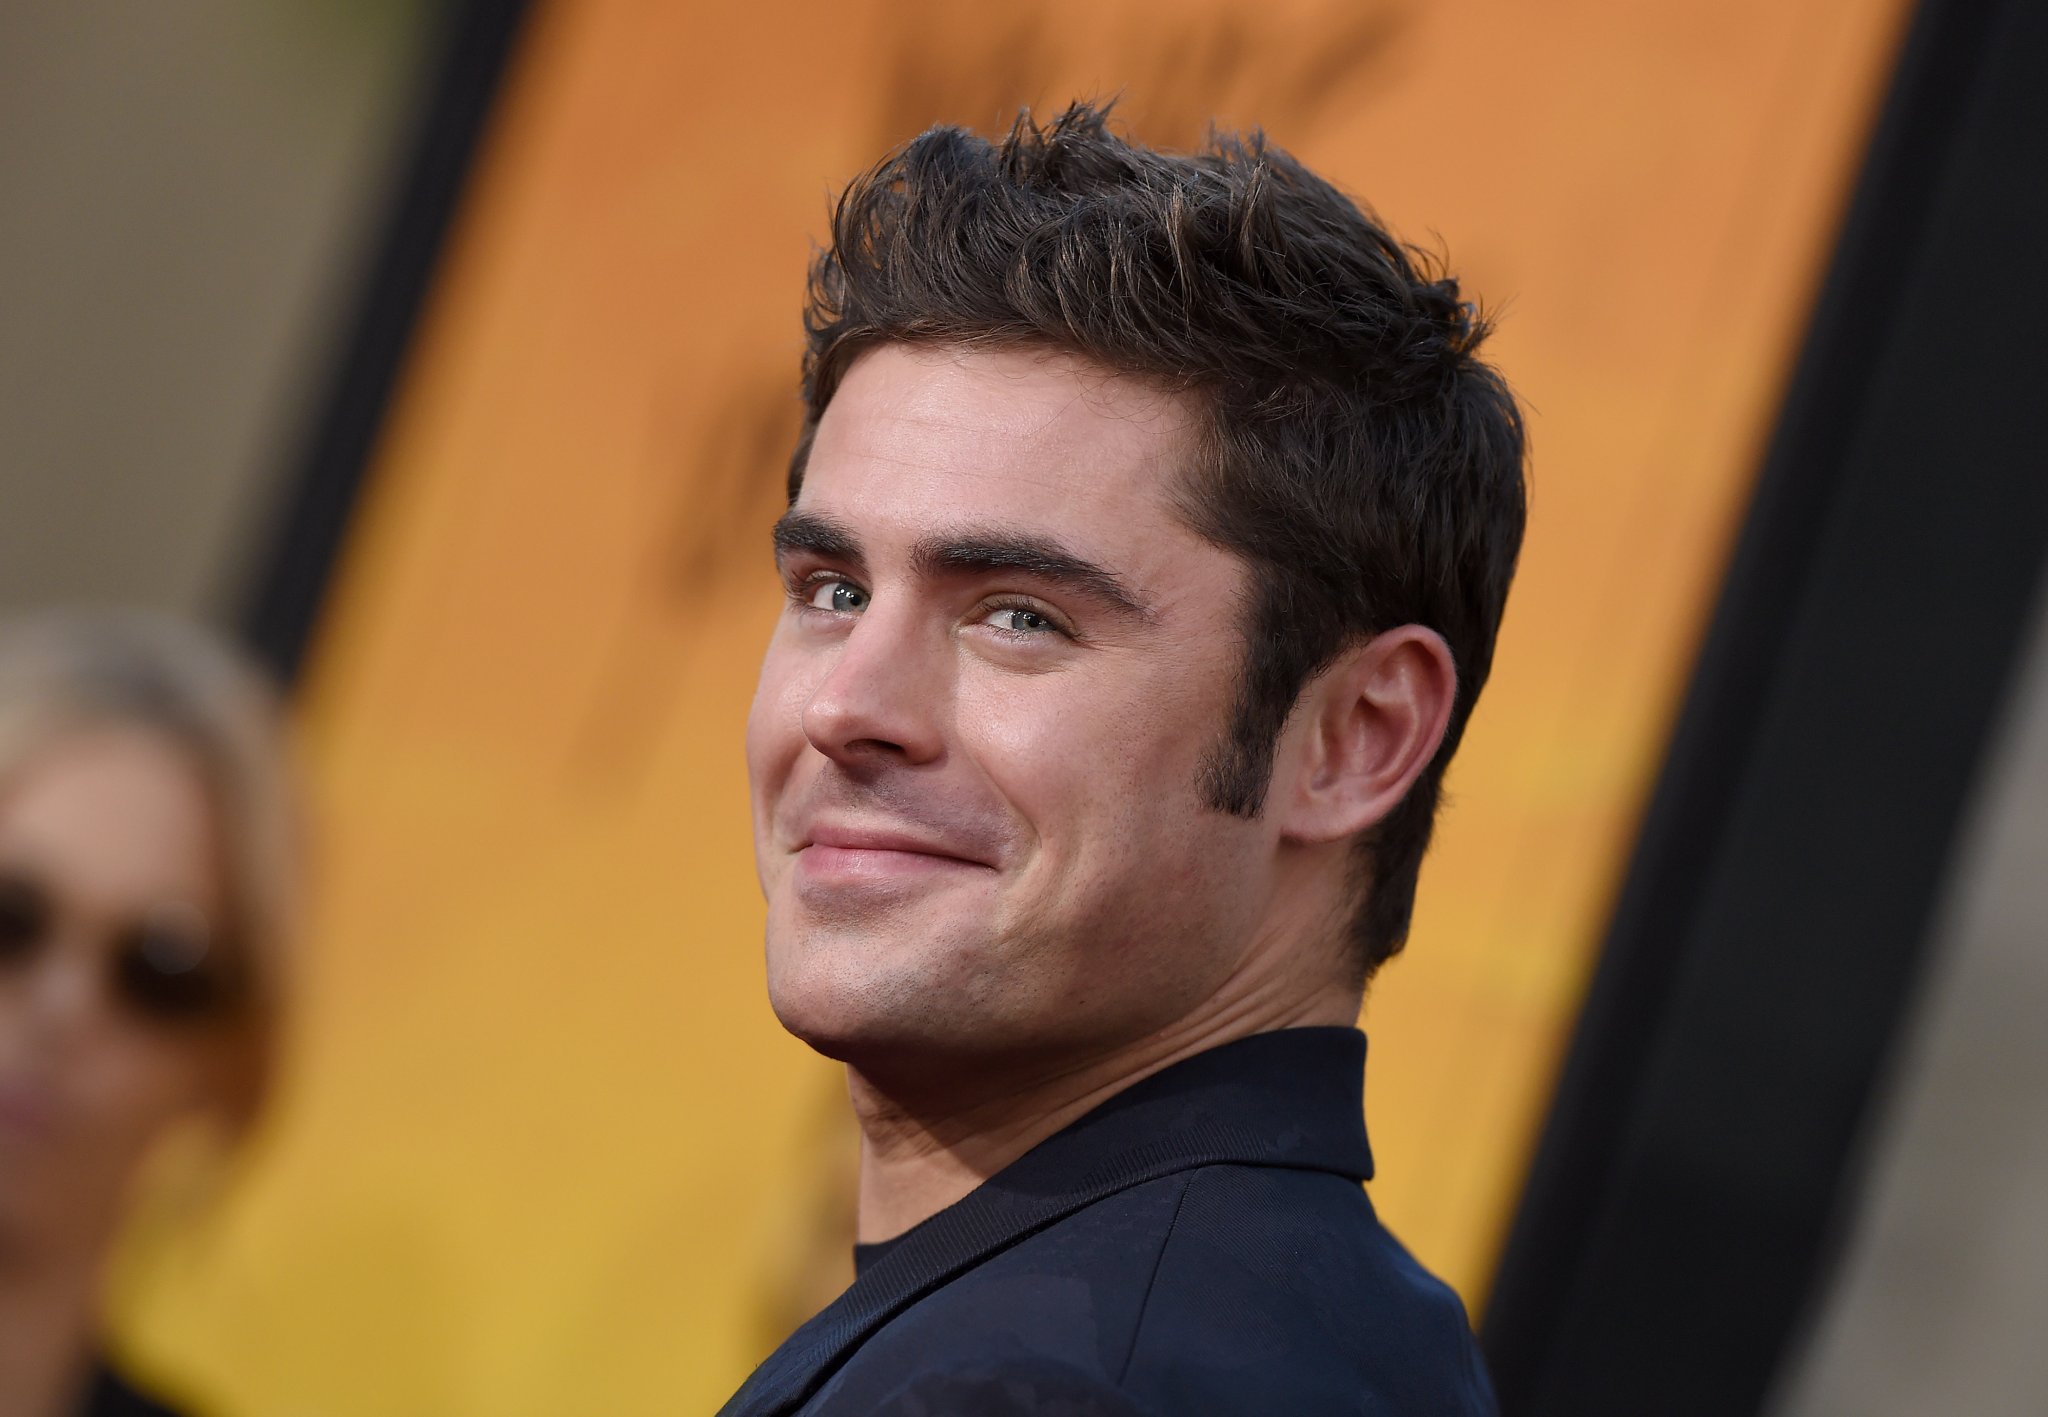 The Internet Reacts To Zac Efron's Face Looking Nearly Unrecognizable In New Video